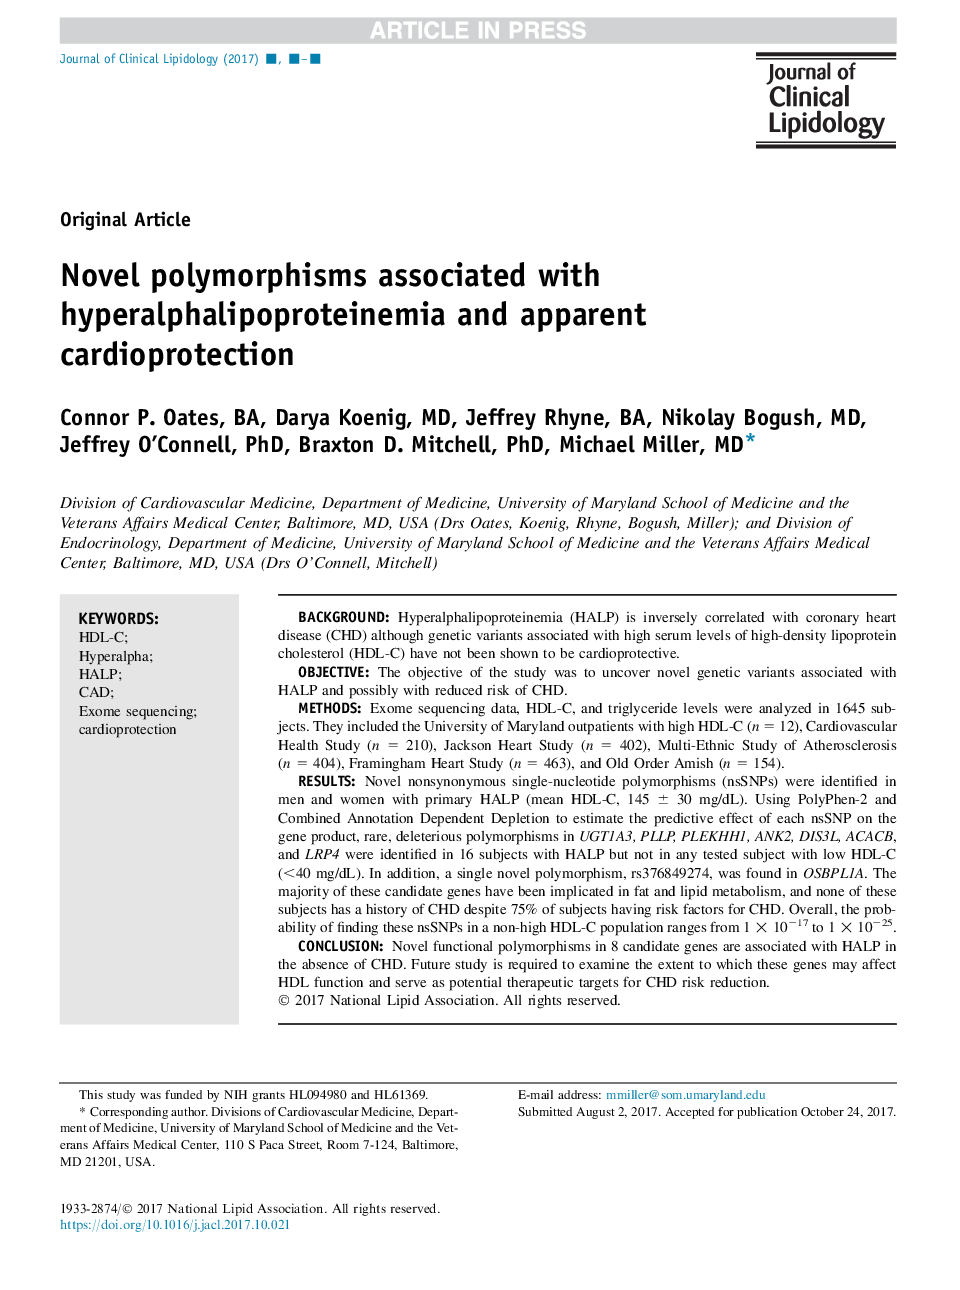 Novel polymorphisms associated with hyperalphalipoproteinemia and apparent cardioprotection